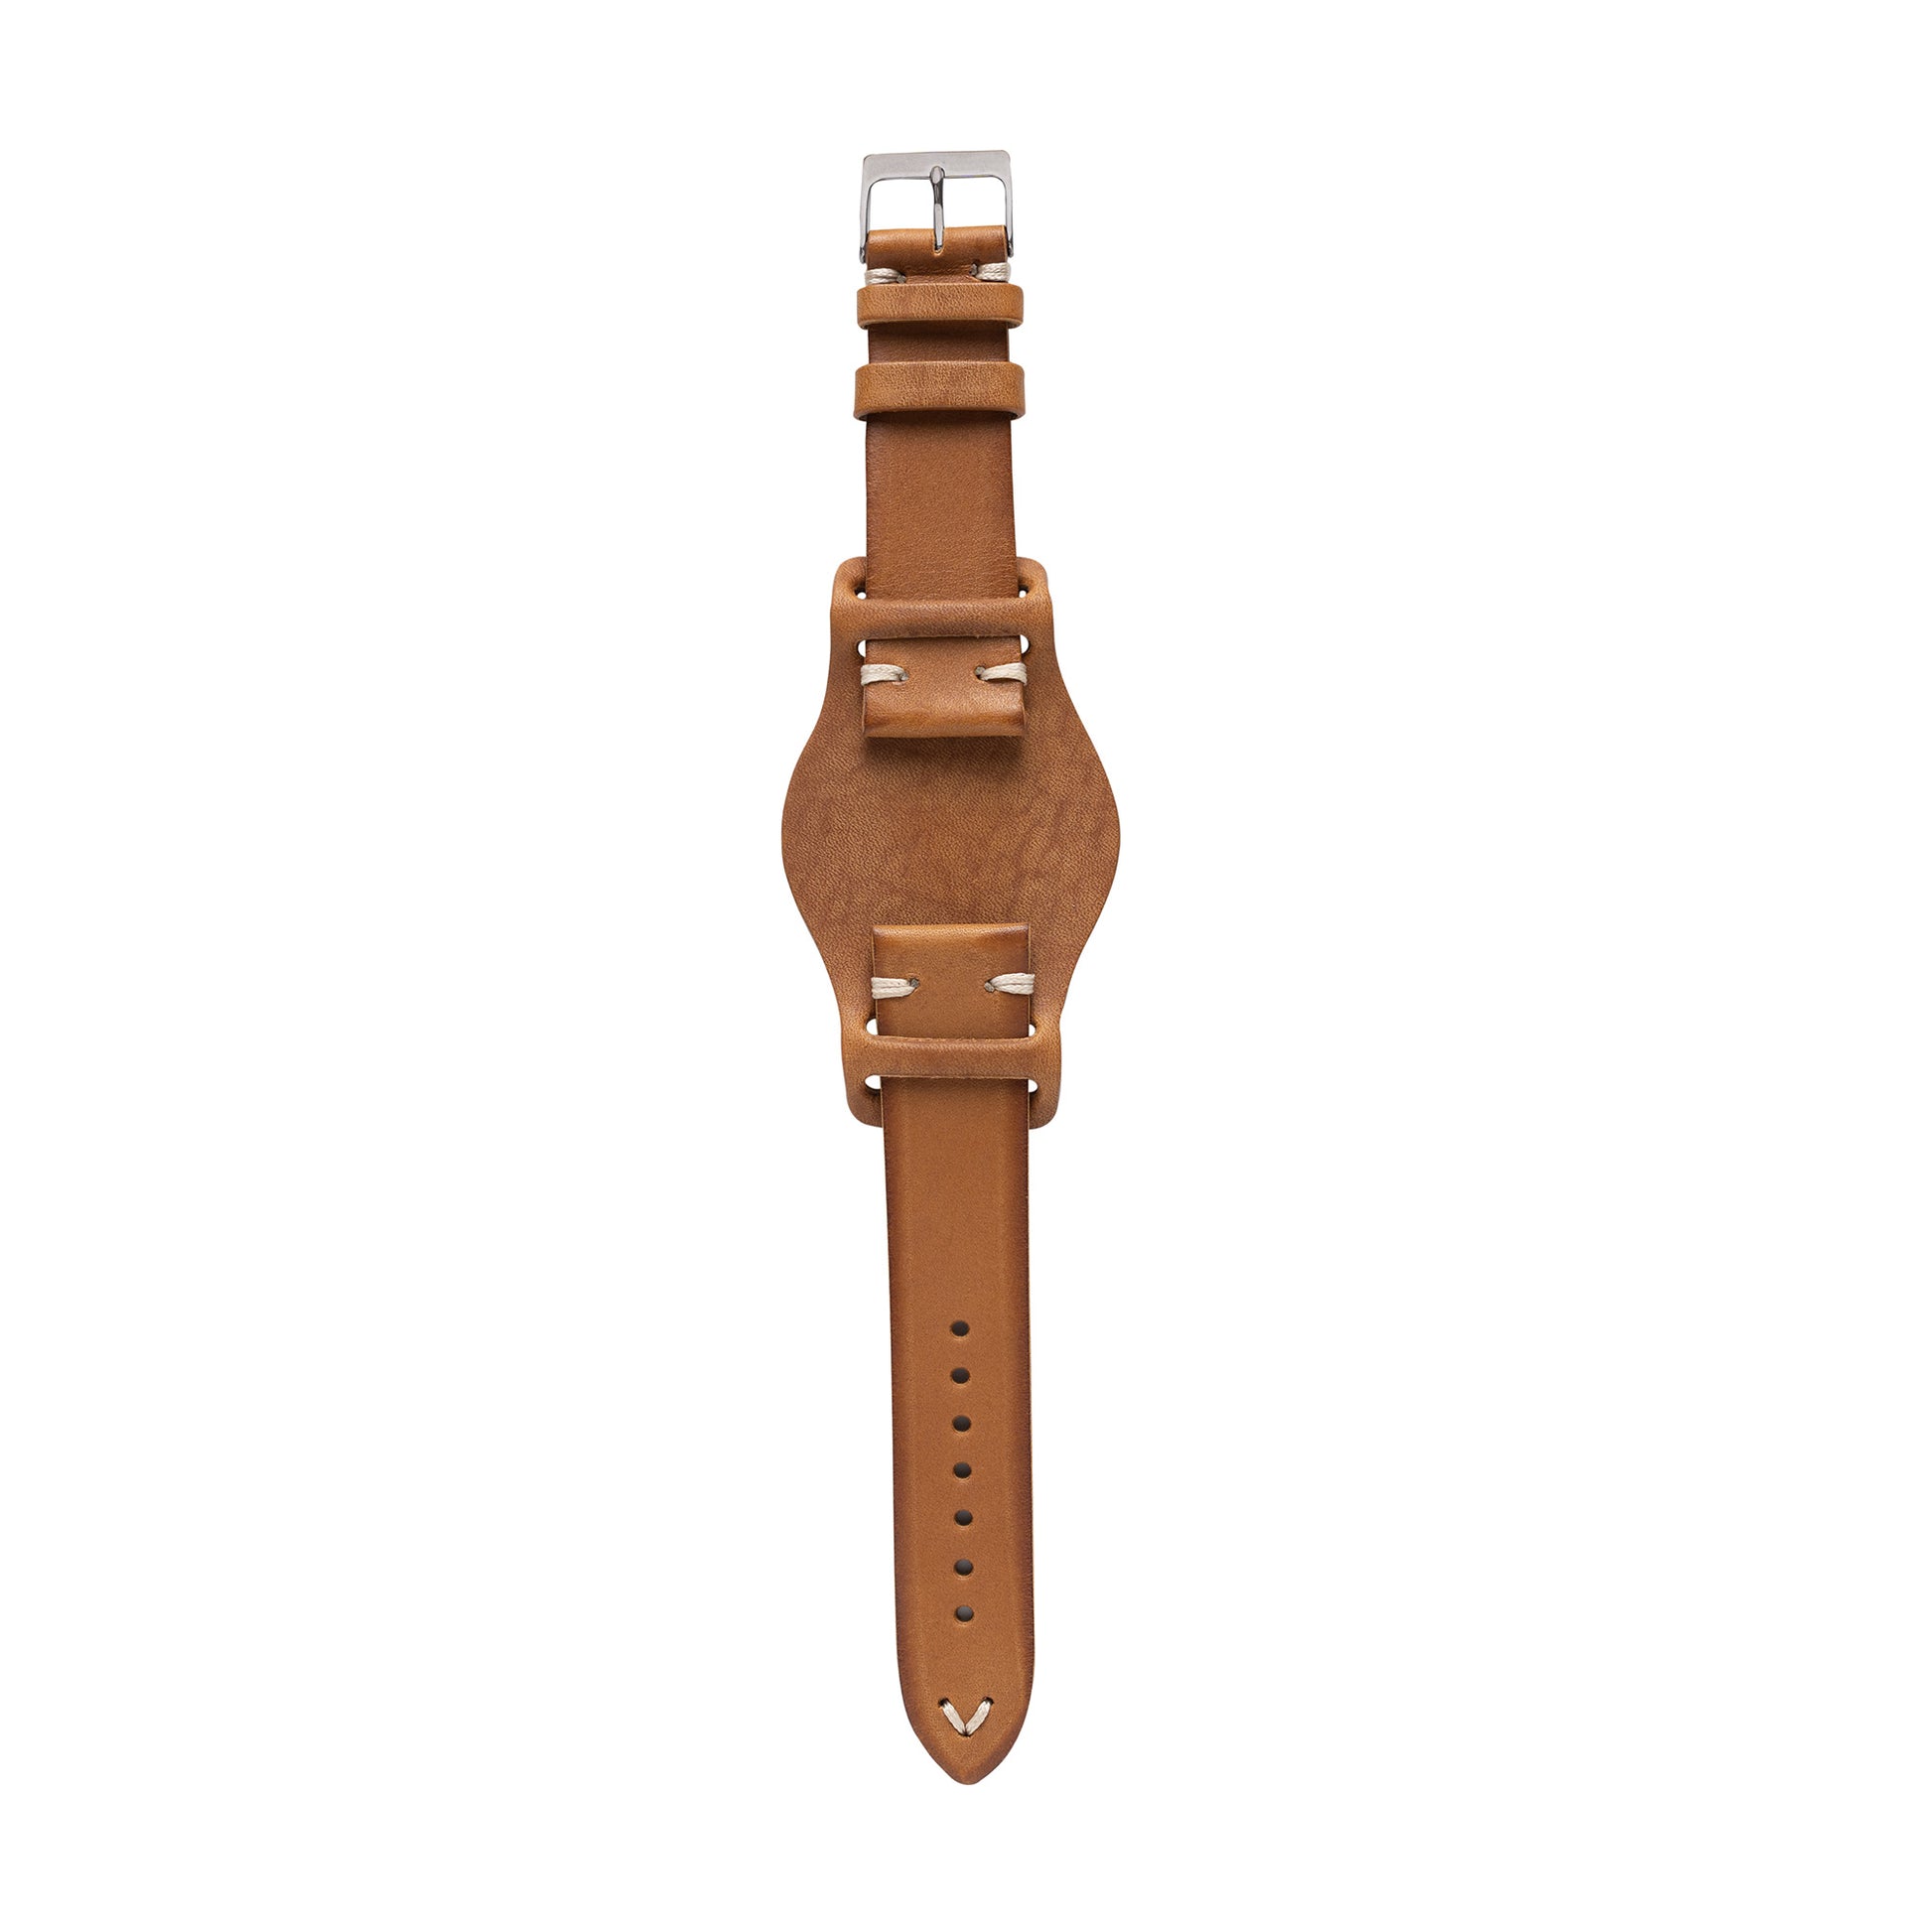 vintage leather watch strap with optional bund strap pad made in Italy - saddle tan color with stainless steel buckle